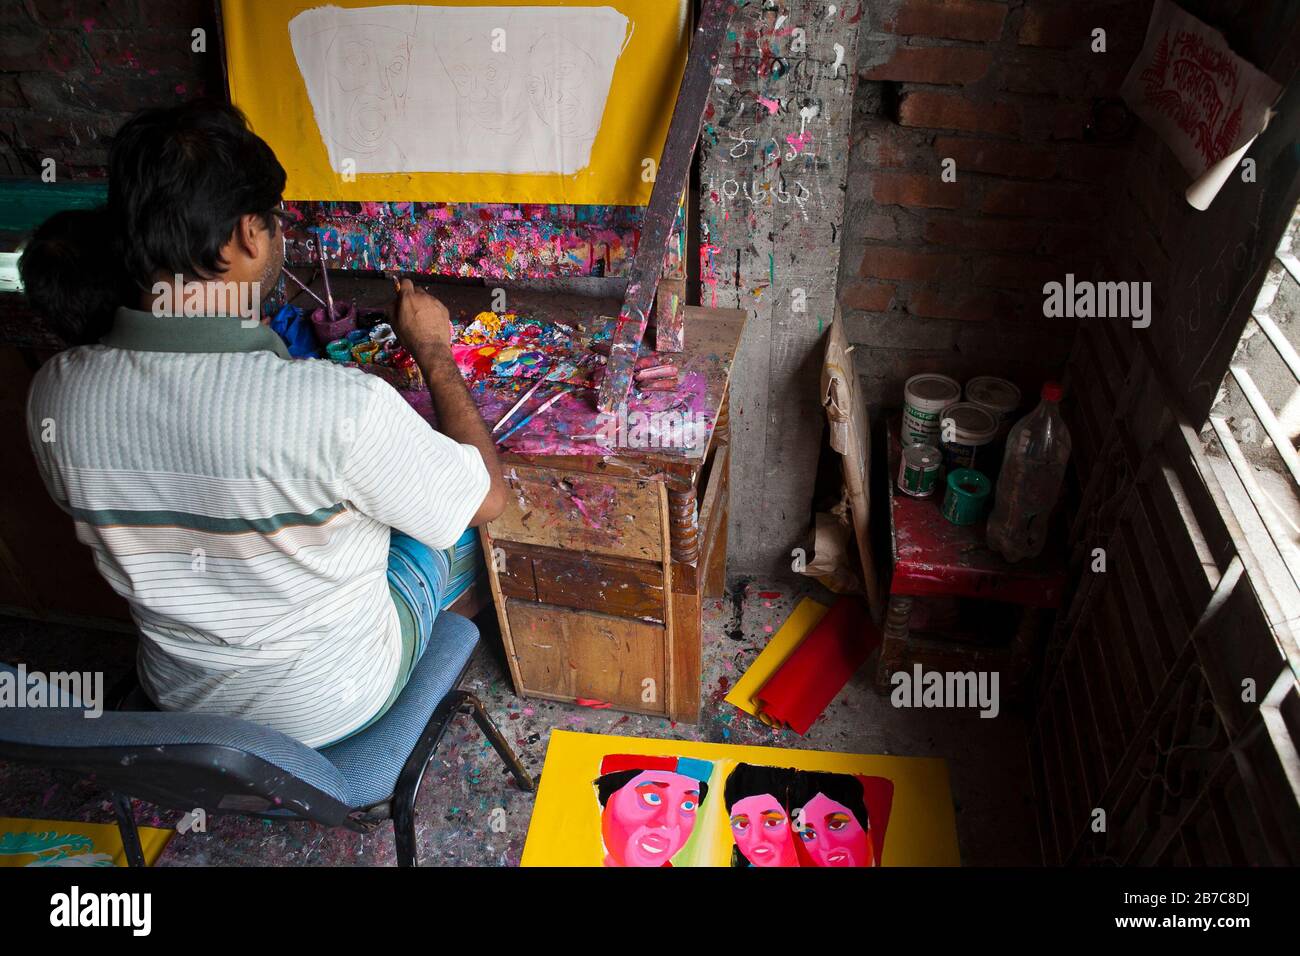 Proshanto Kumar Das, son of Raj Kumar Das, best known as RK Das, one of the first generation rickshaw artists in Bangladesh, is busy in painting a rickshaw art at his studio in capital Dhaka, on May 3, 2012. The rickshaw art is a form of pop art that depicts our urban culture and folklore of Bangladesh. Rickshaws were first introduced in Bangladesh in the 1930s from Japan, where the three-wheeled vehicles were known as 'nintaku'. The idea of decorating the leg-powered contraptions took off in Bangladesh the 1950s with the tradition following the simple yet colourful style then used by painters Stock Photo